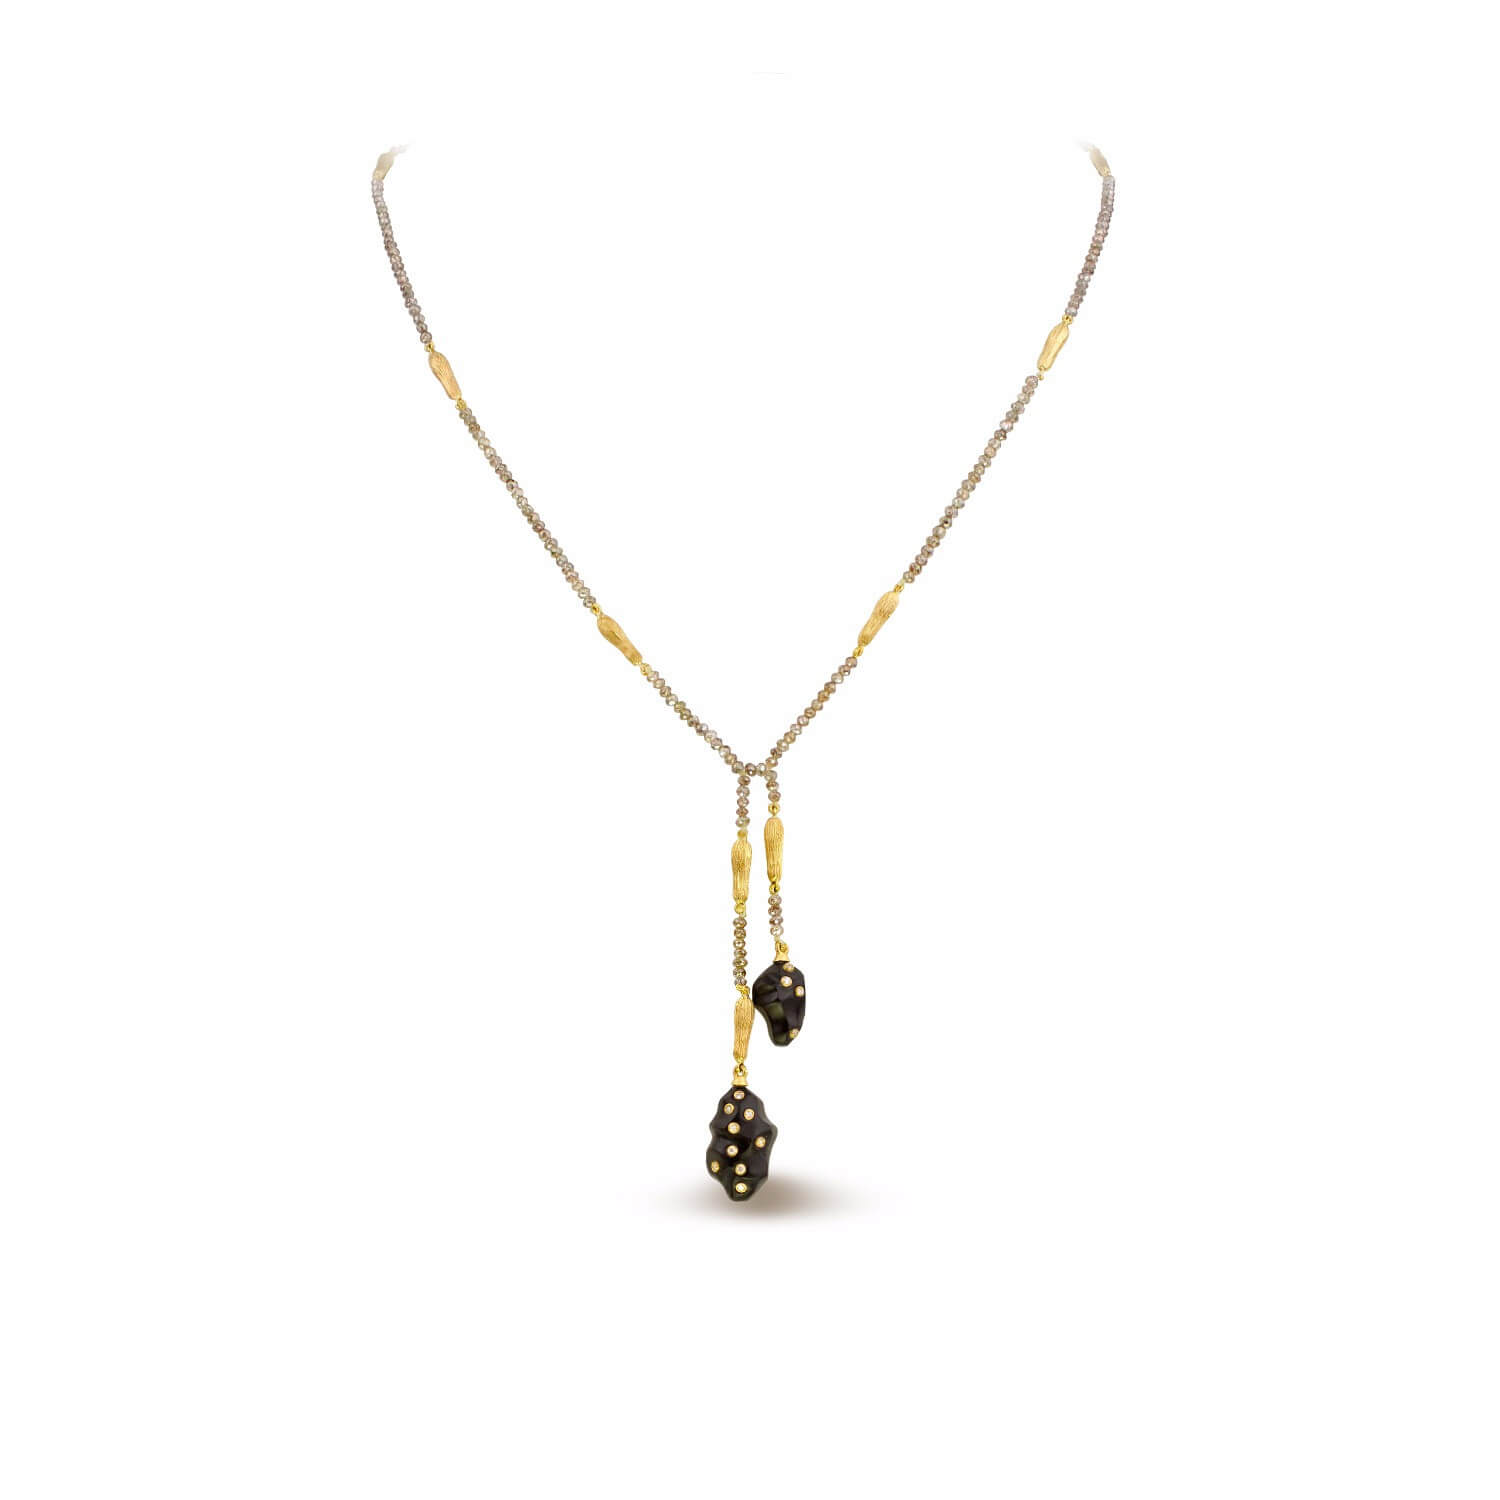 Terre collier or jaune  briollets onyx